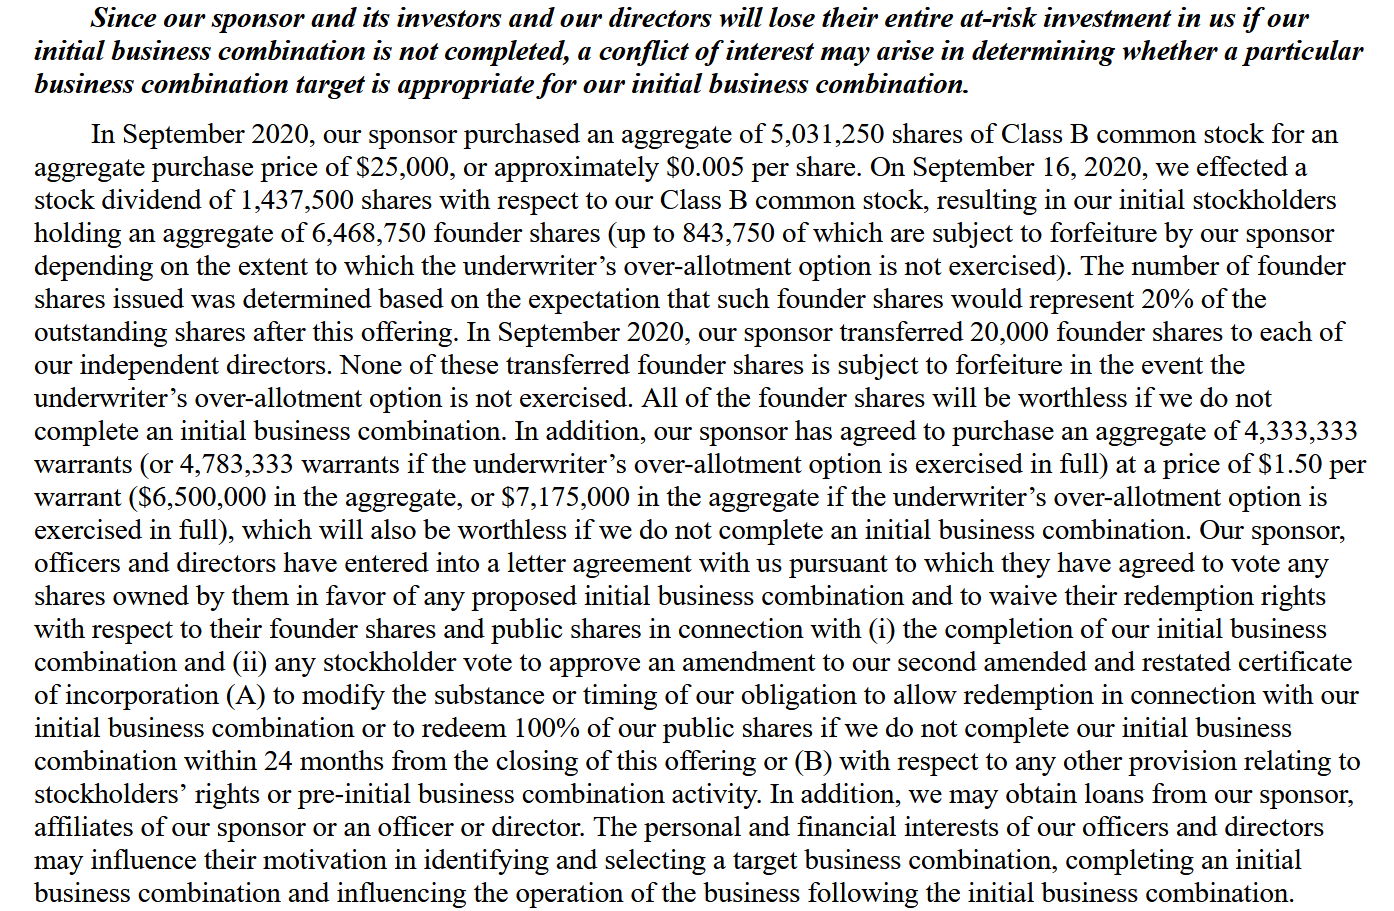 Acknowledgement from page 55 of Lefteris S1 filing with the SEC.